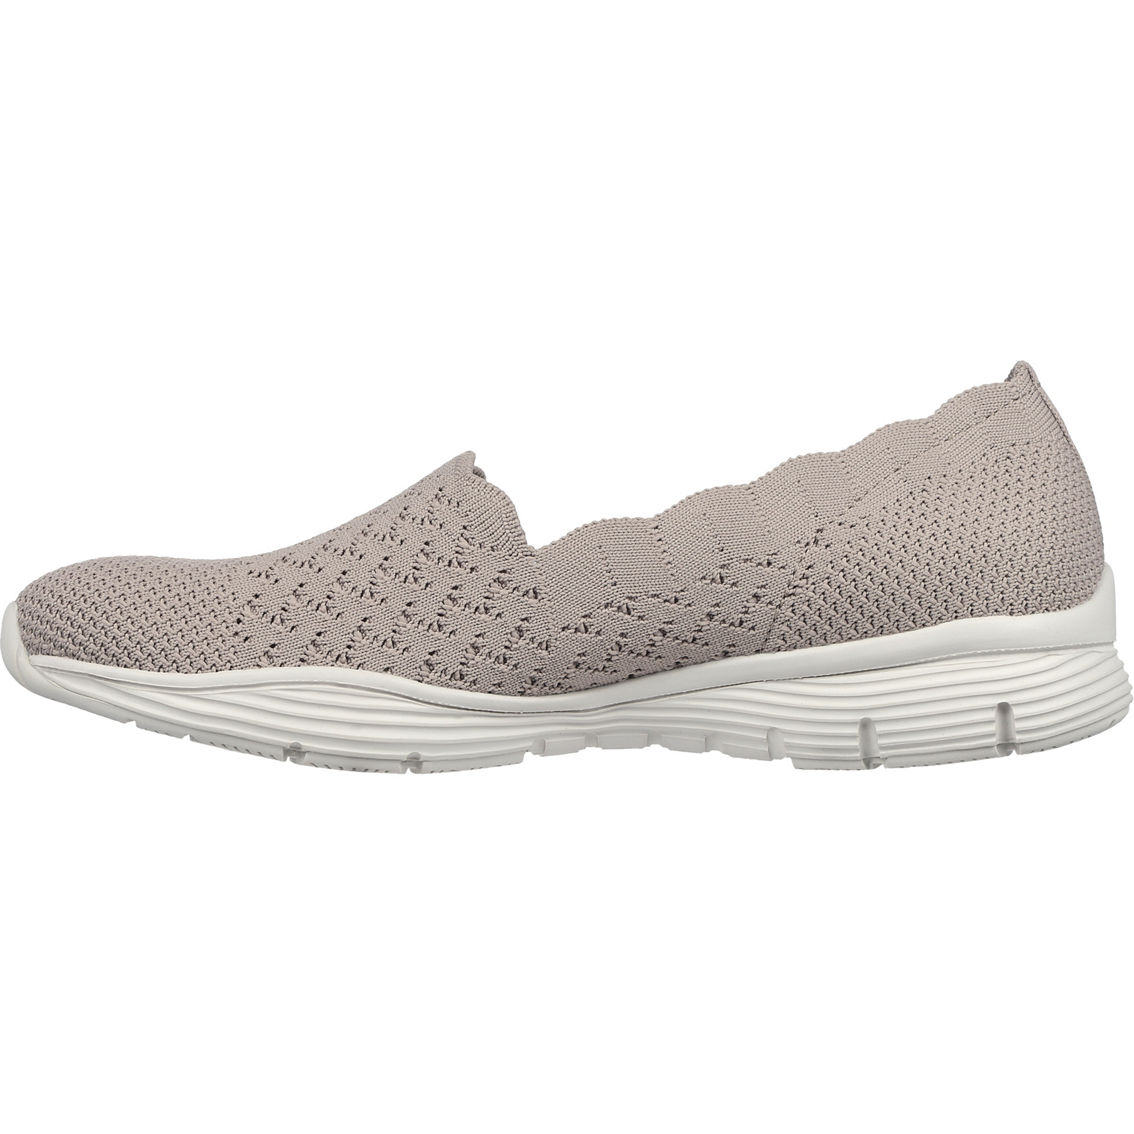 Skechers Seager Stat Slip Ons - Image 2 of 4